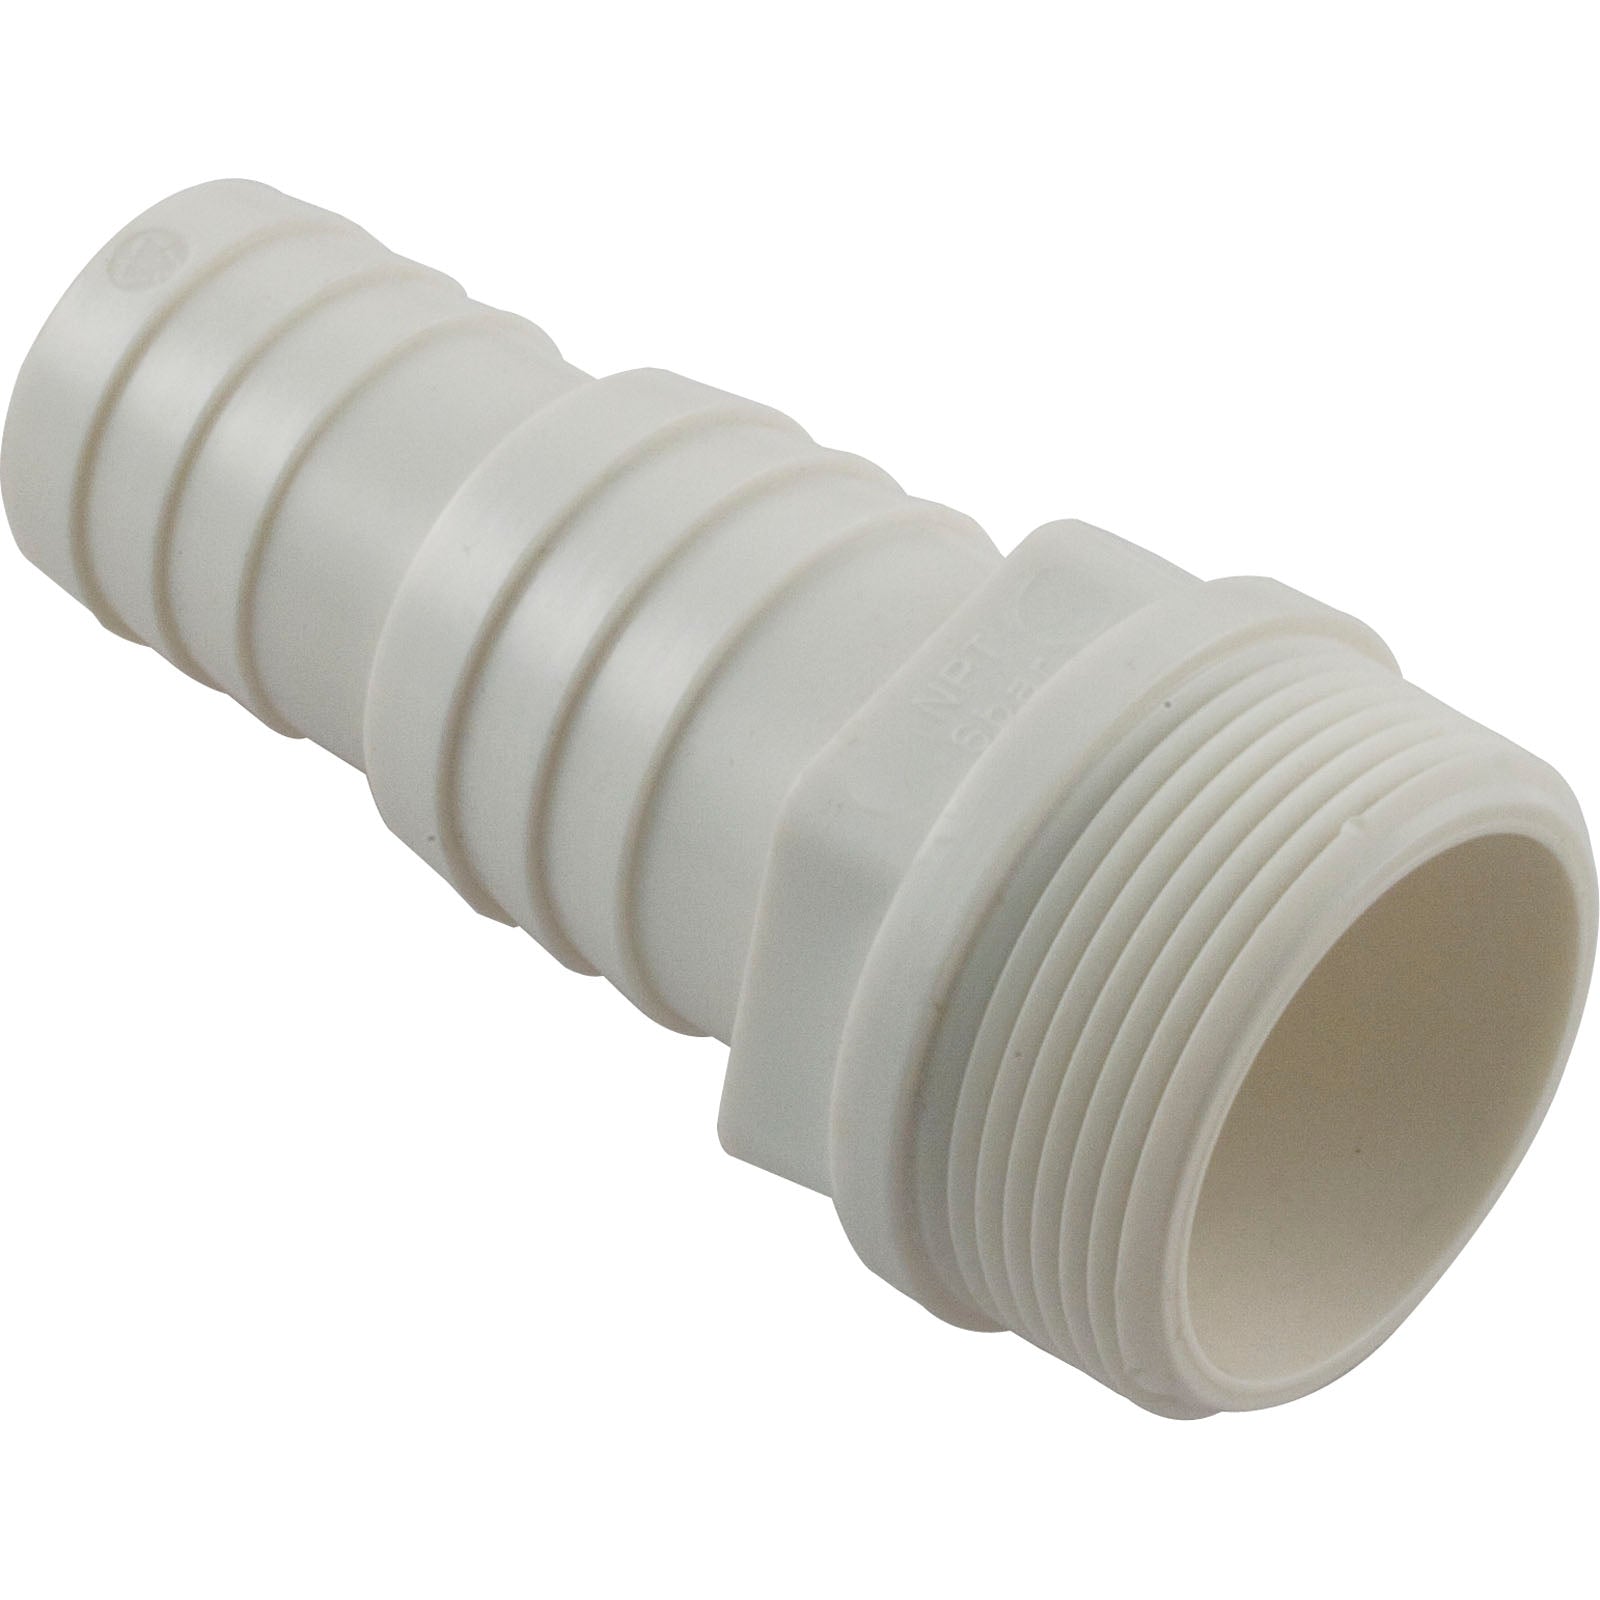 Adapter, 1-1/2" Barb x 1-1/2"union- WC122318P